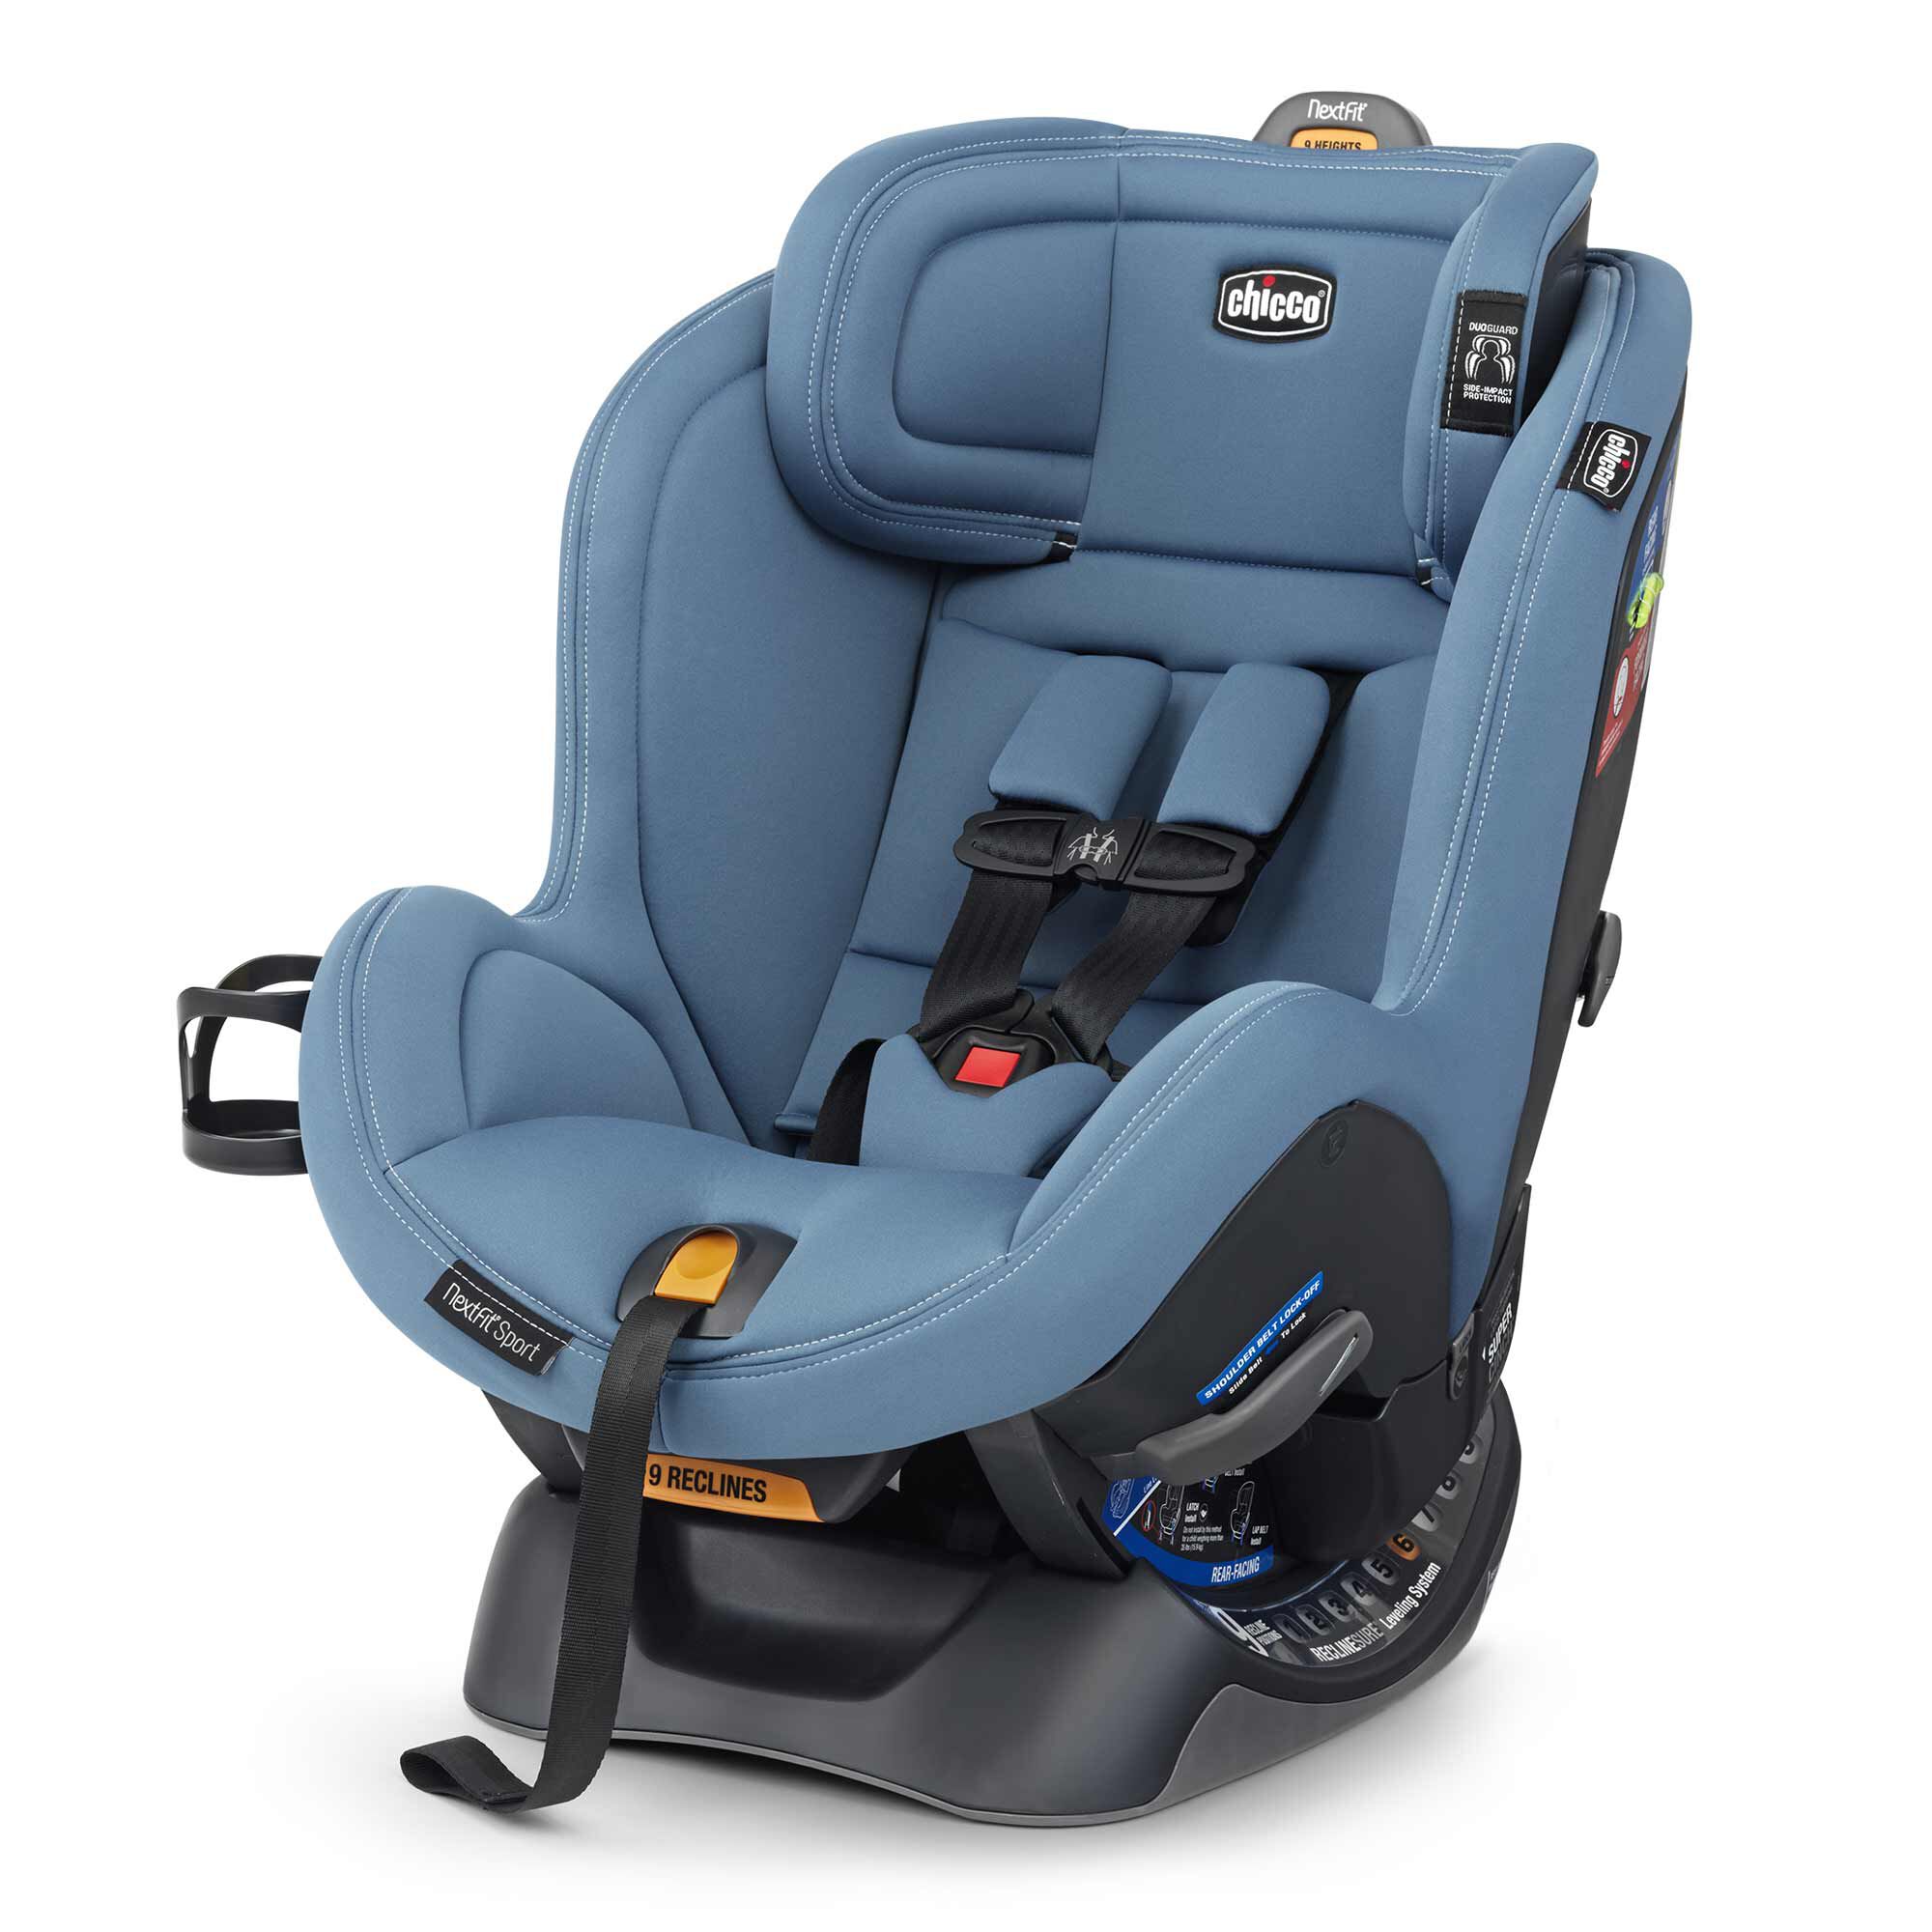 NextFit Sport Convertible Car Seat - Sky | Chicco